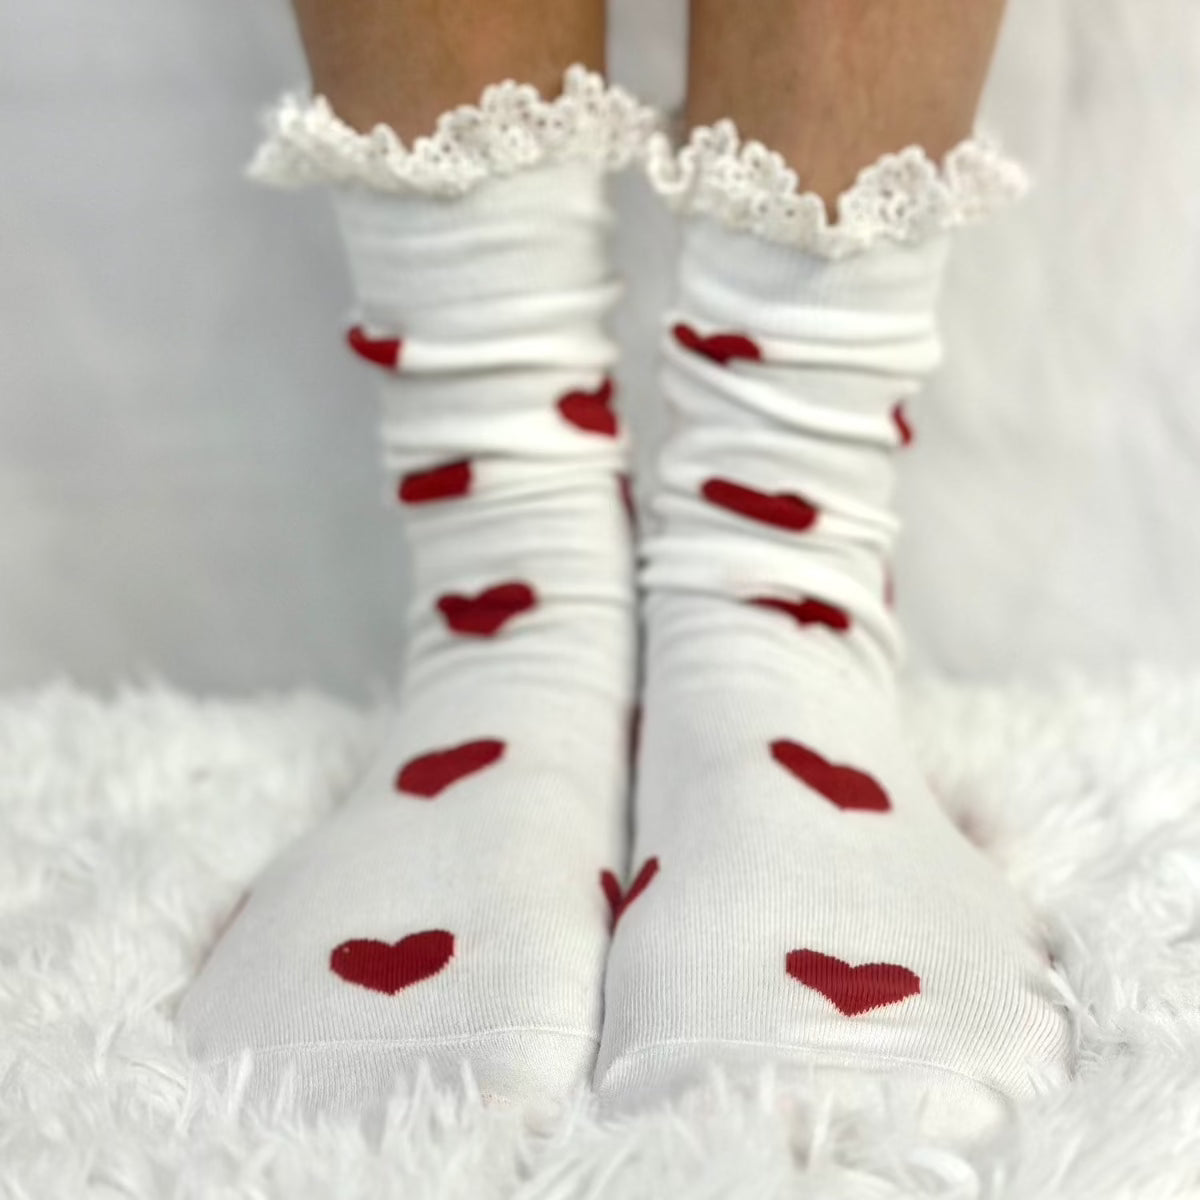 HEARTS DELIGHT lace top heart ankle sock - cream red, Valentine day socks,  hearts socks women, red heart crew lace socks, 